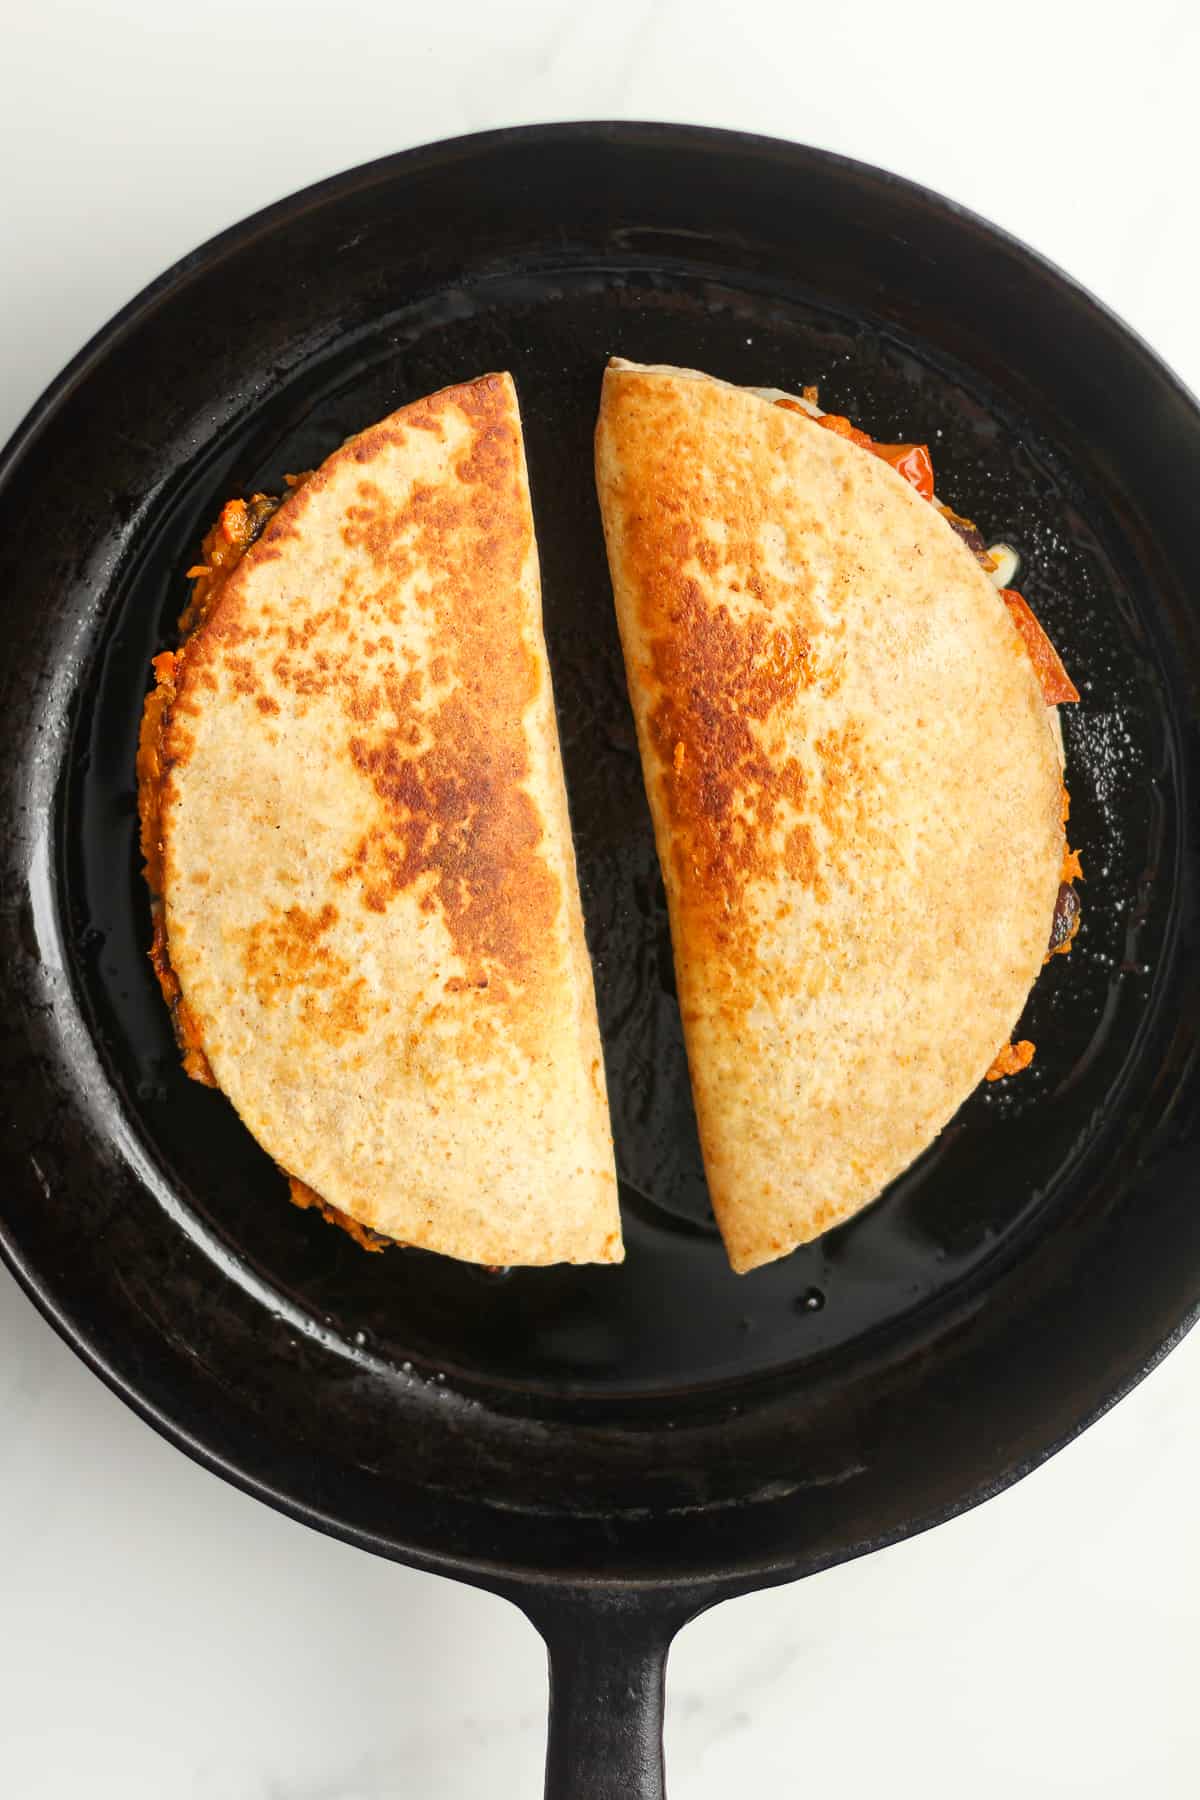 A skillet of the cooked quesadillas.